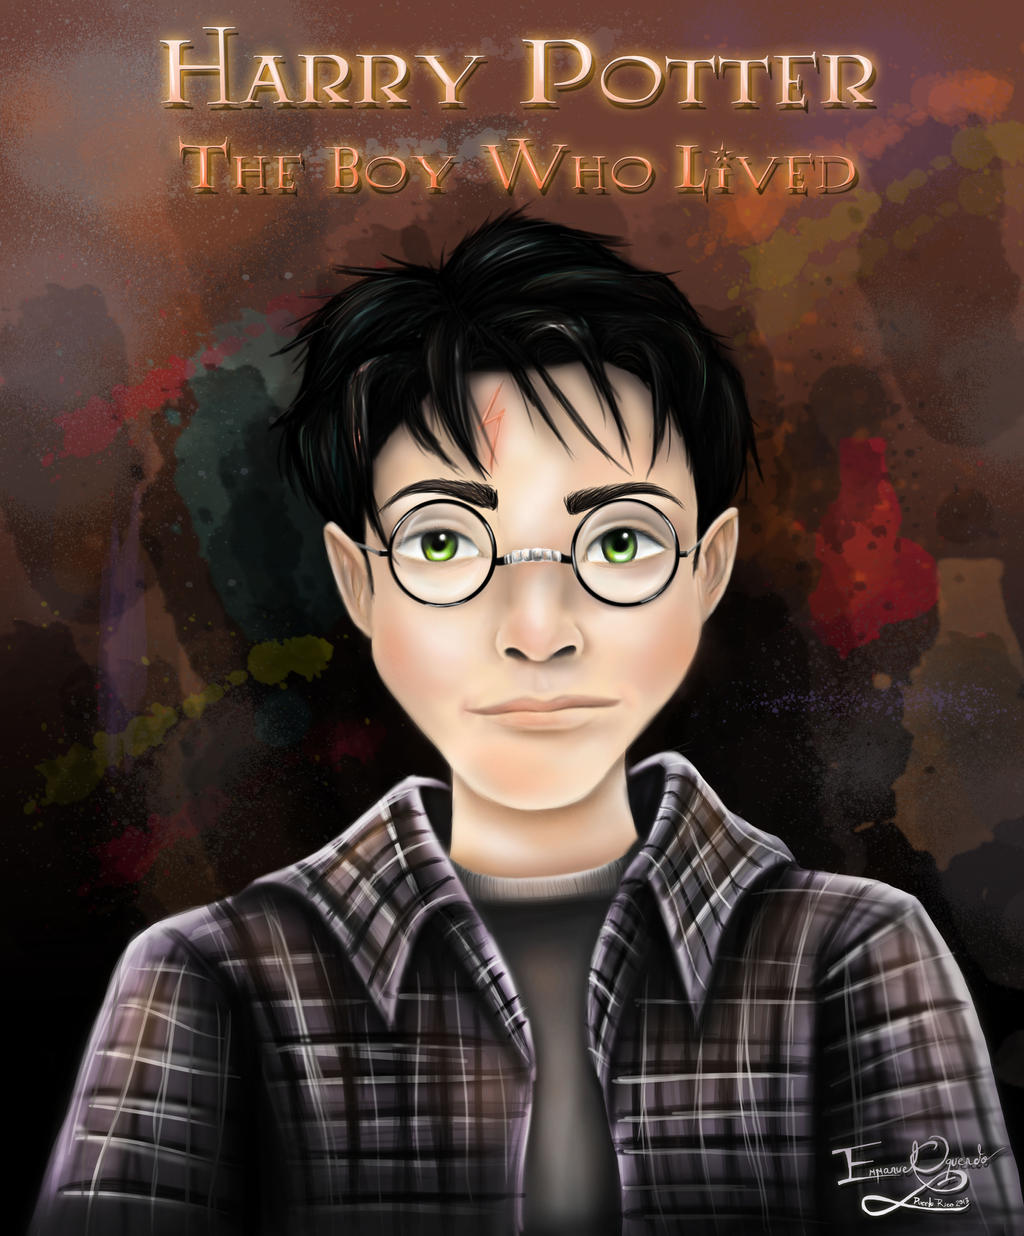 eleven_year_old_harry_potter_by_emmanuel7_d6dip85-fullview